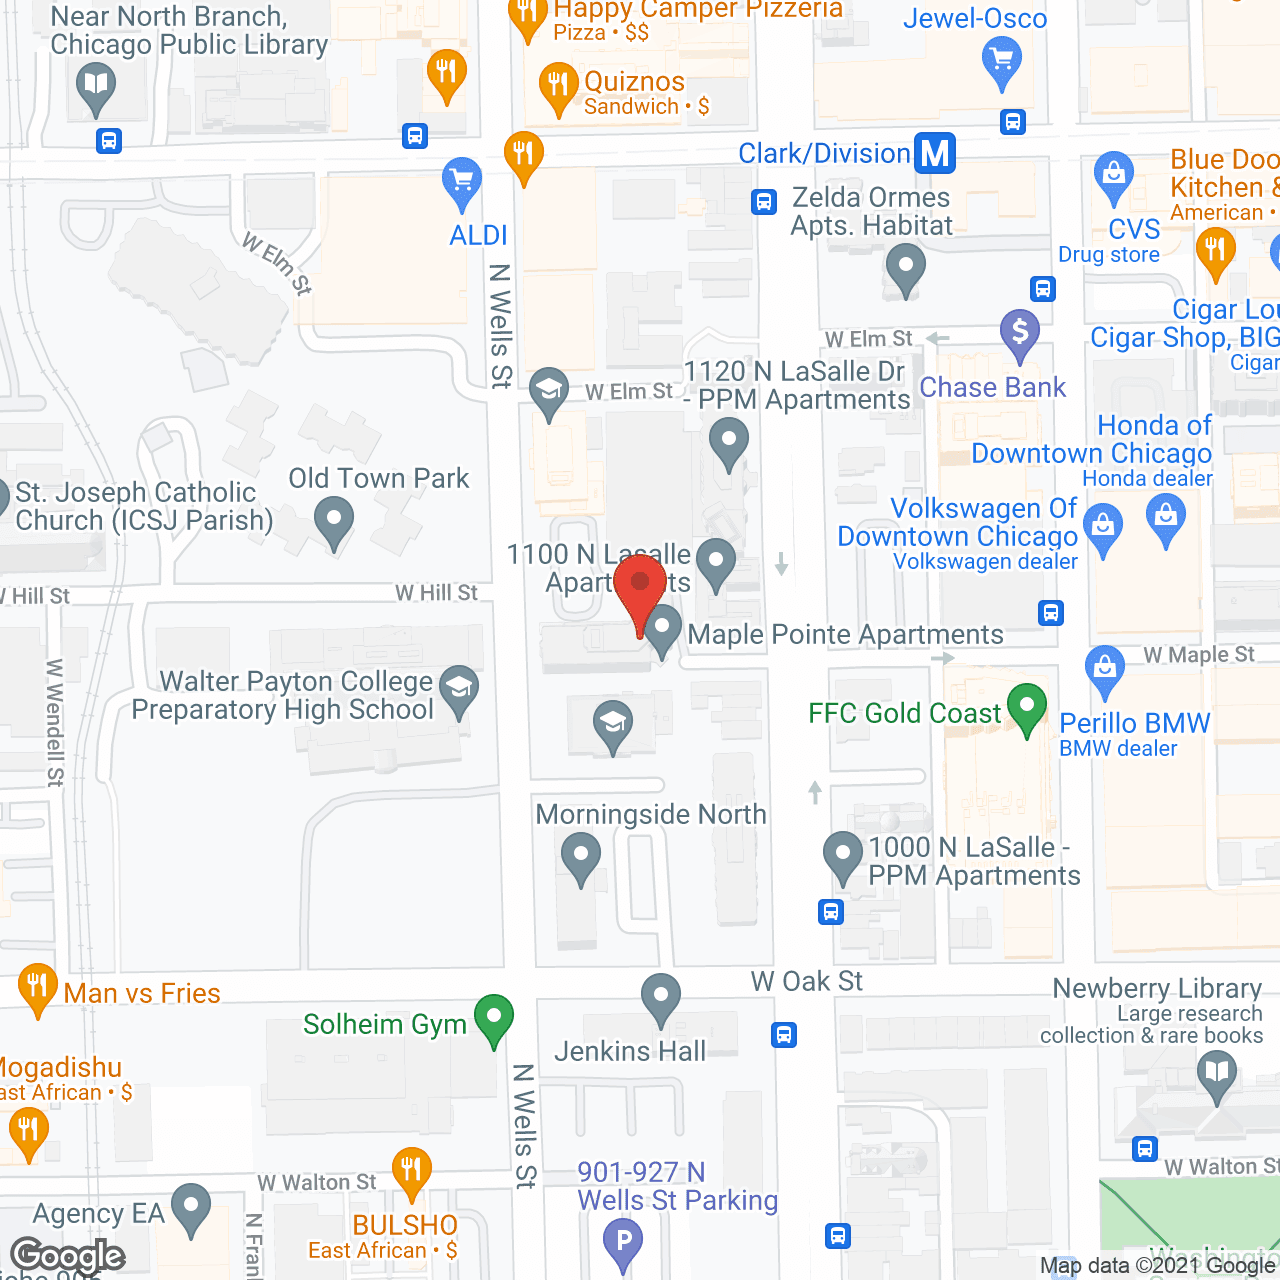 Maple Pointe Apartments in google map